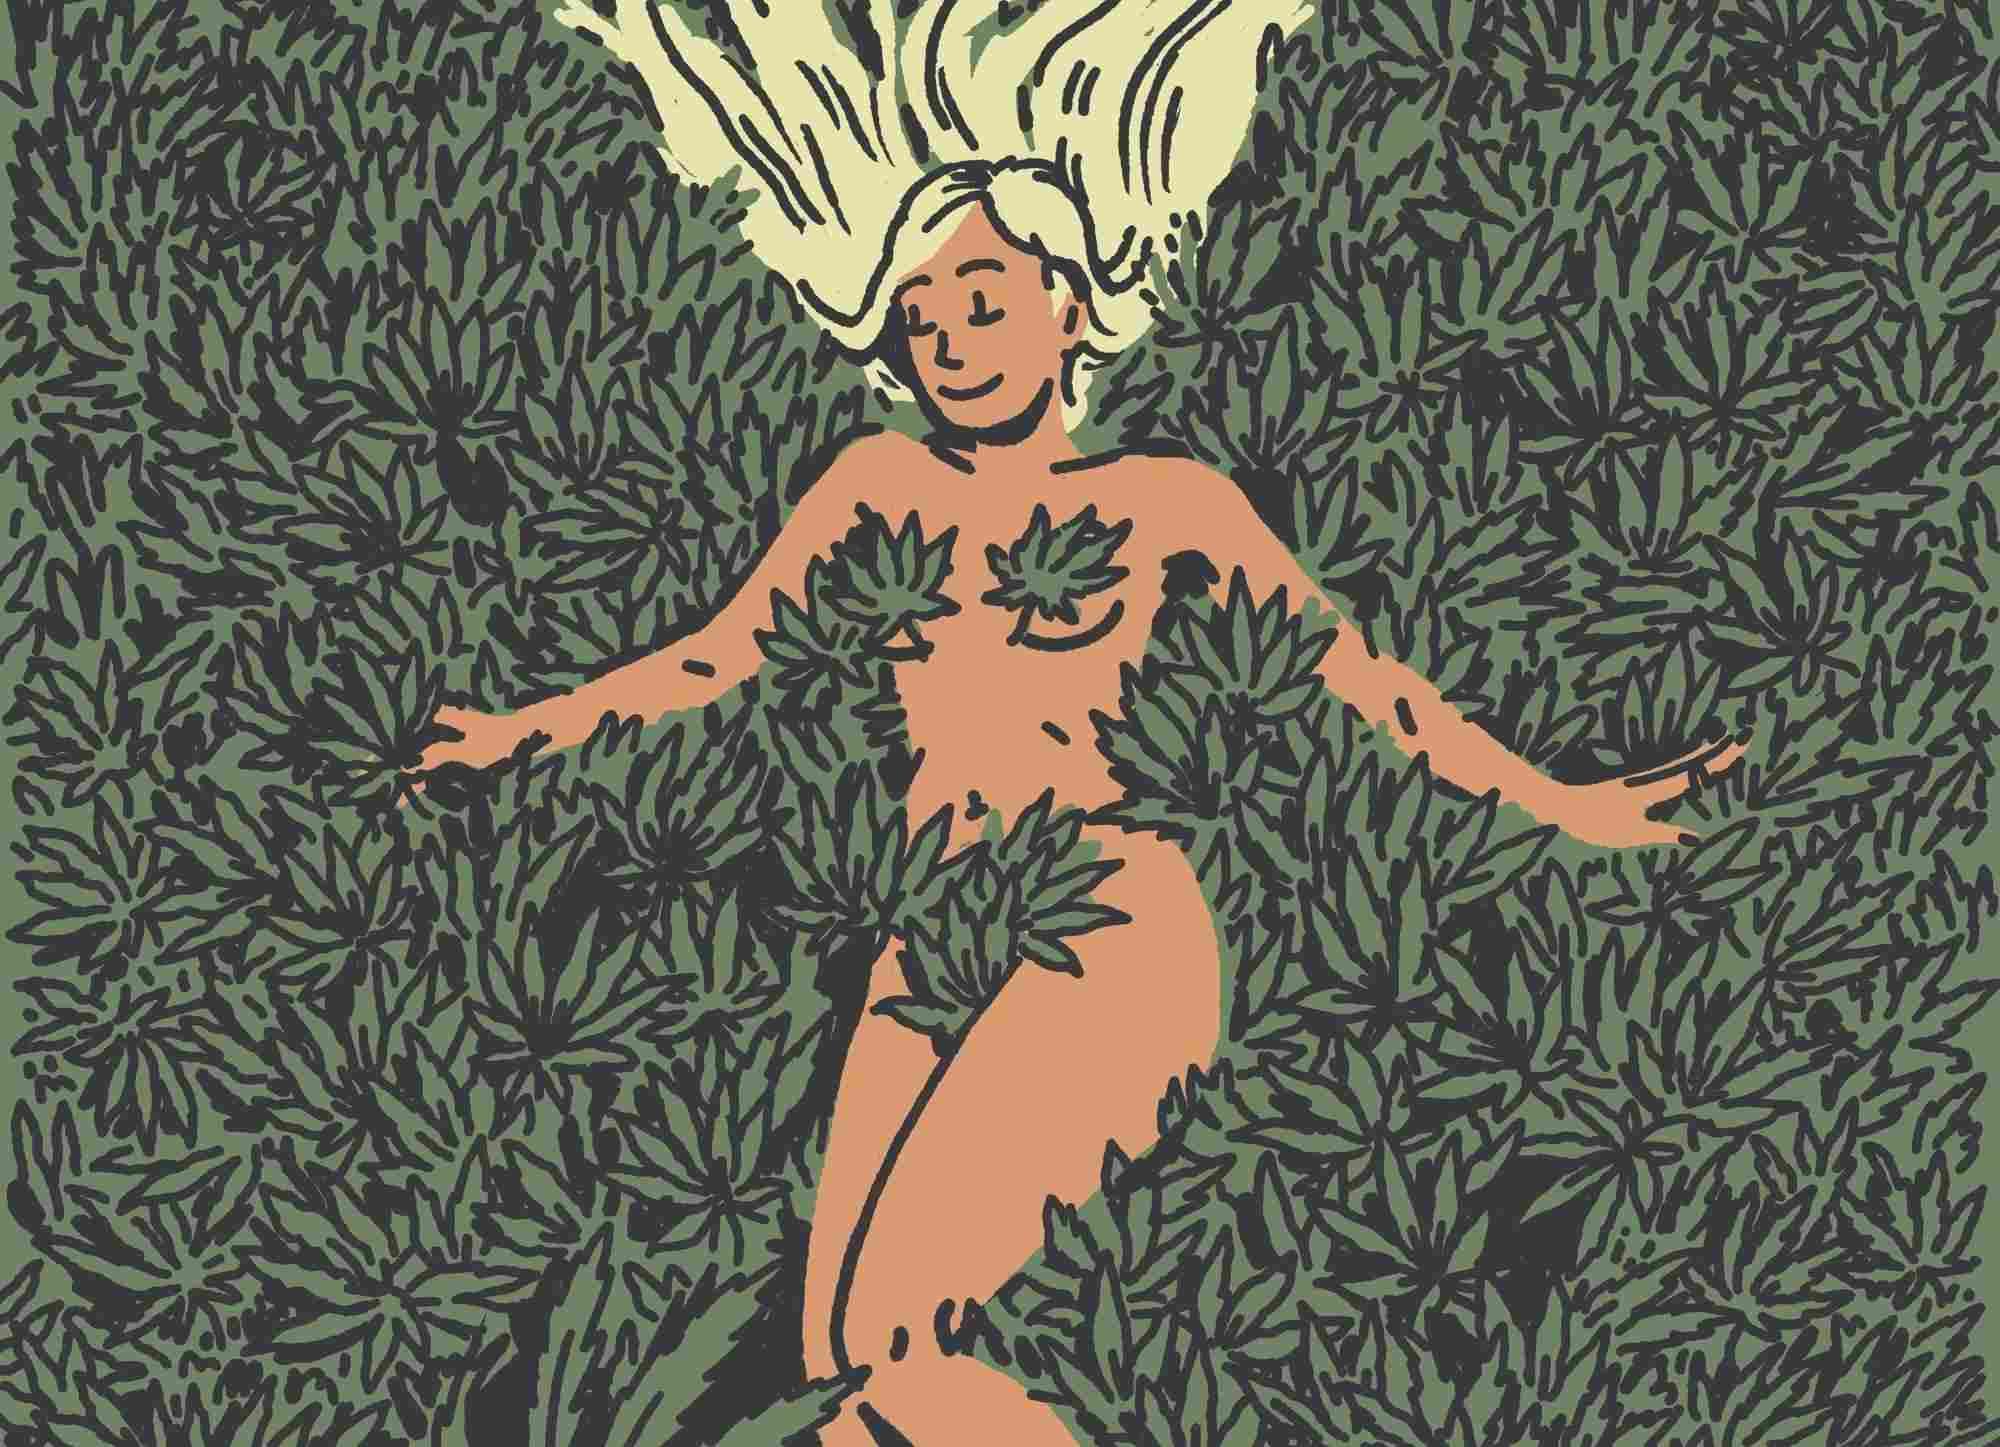 Animated Girl lying in a pool of cannabis